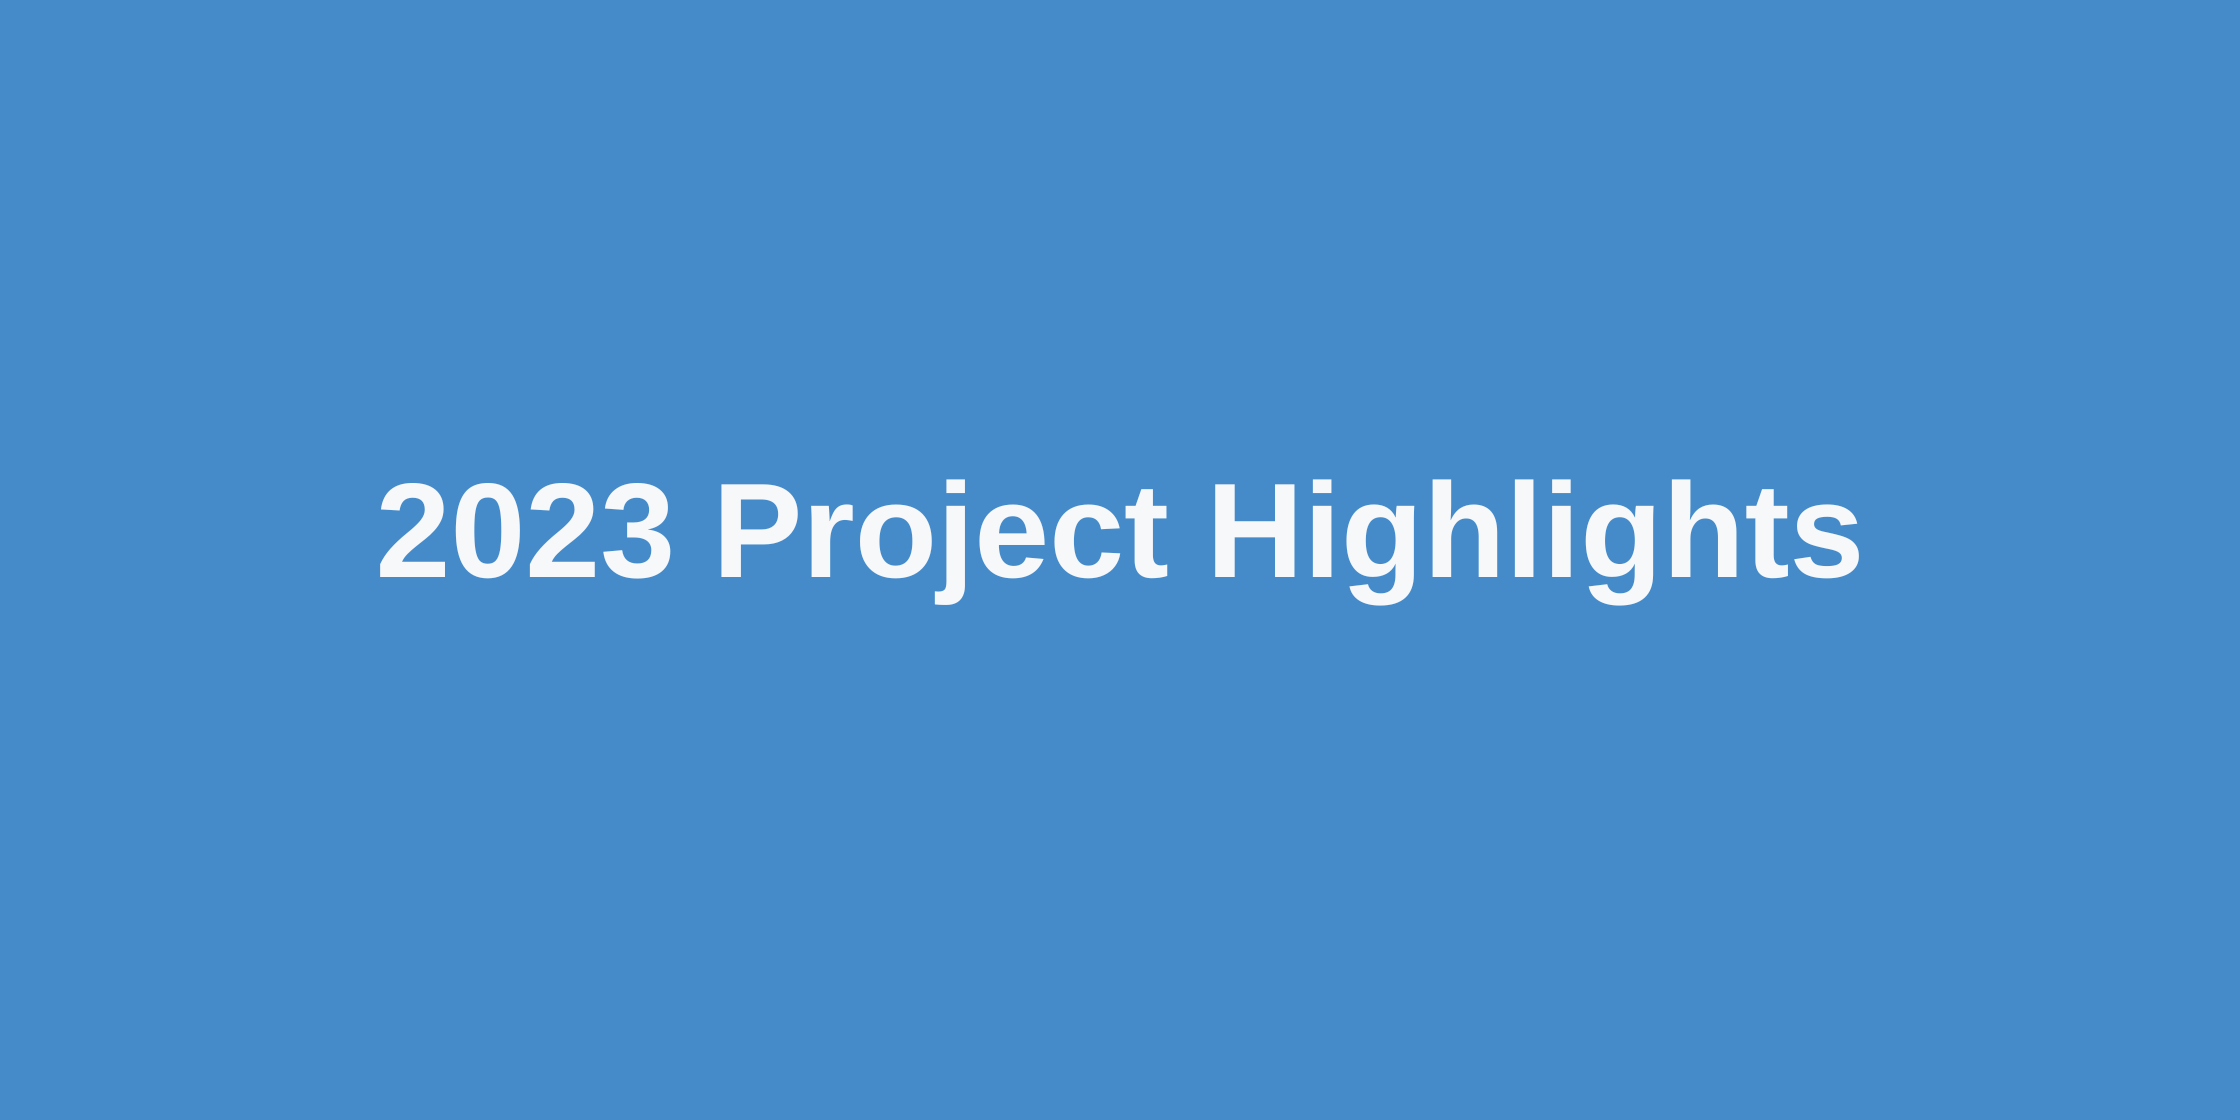 DocTech 2023 Project Highlights - Creating Operational Efficiency